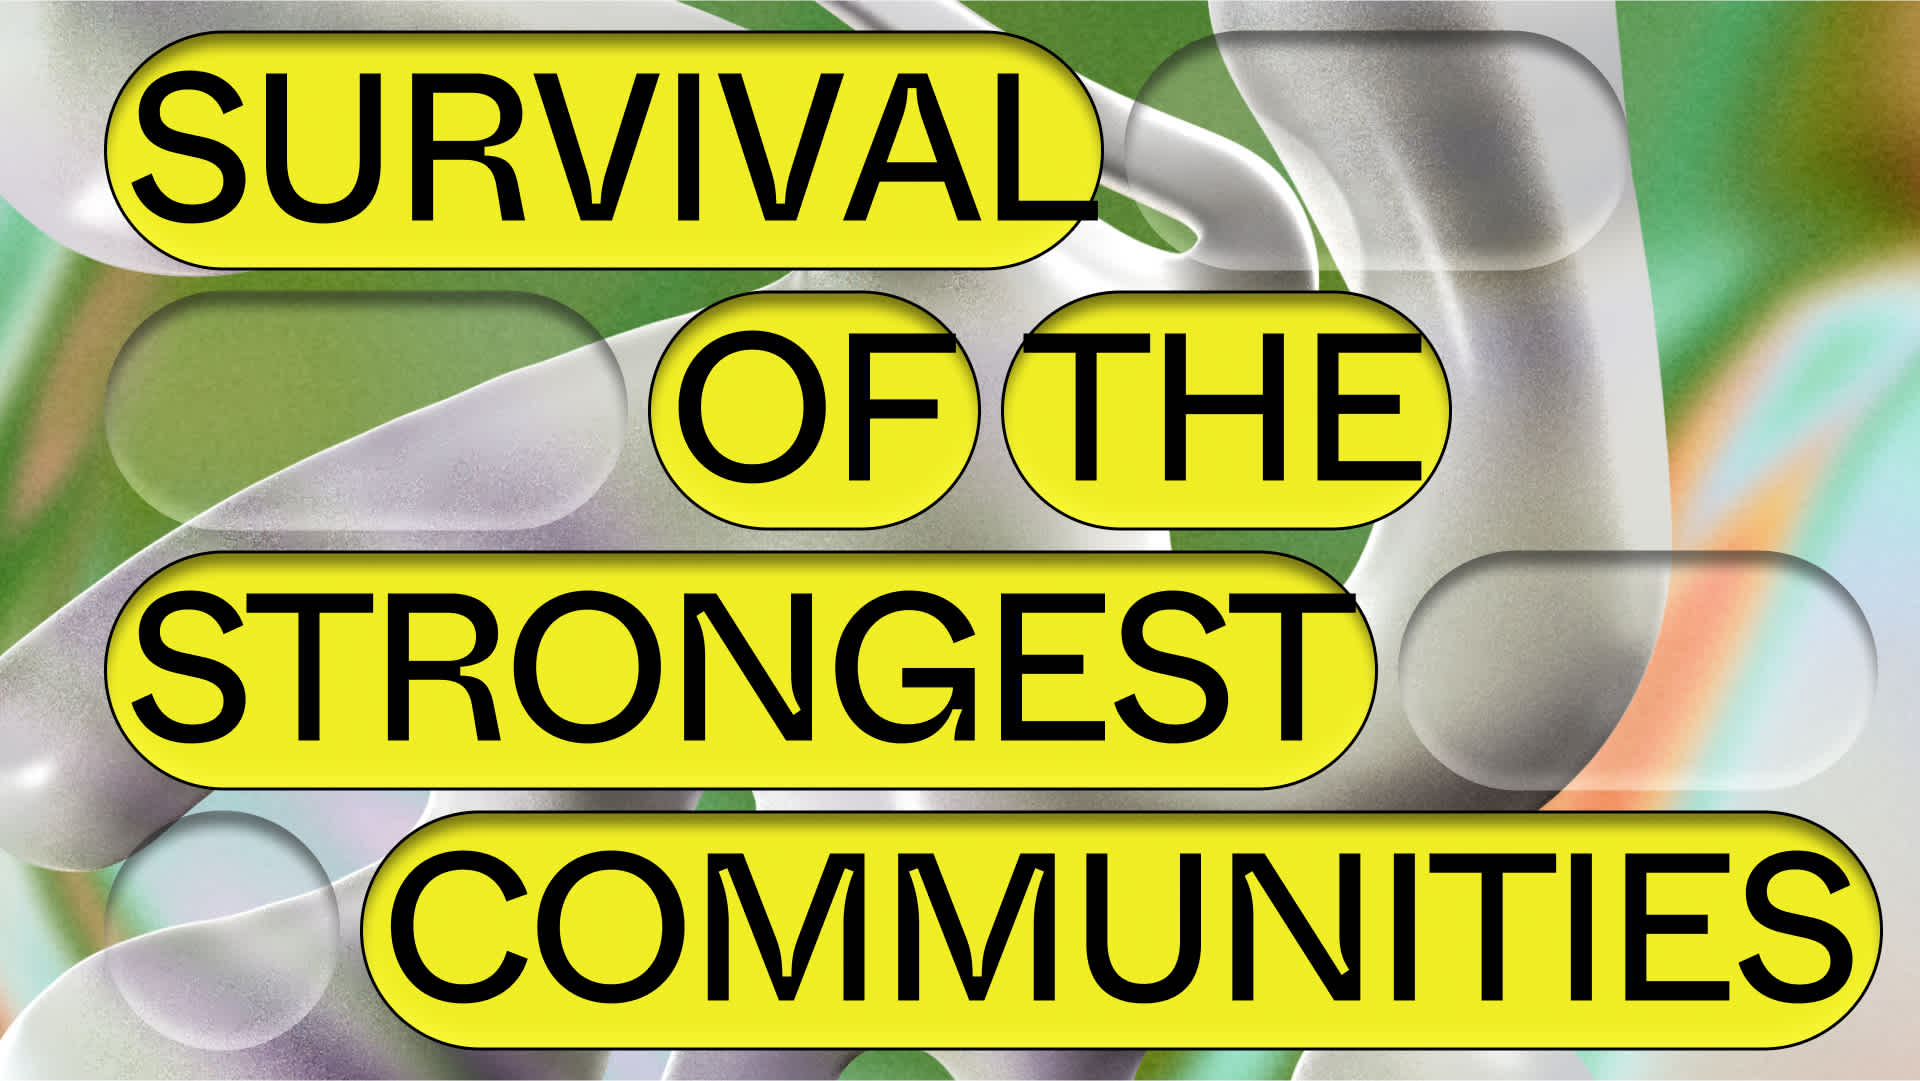 Survival of the strongest communities. 